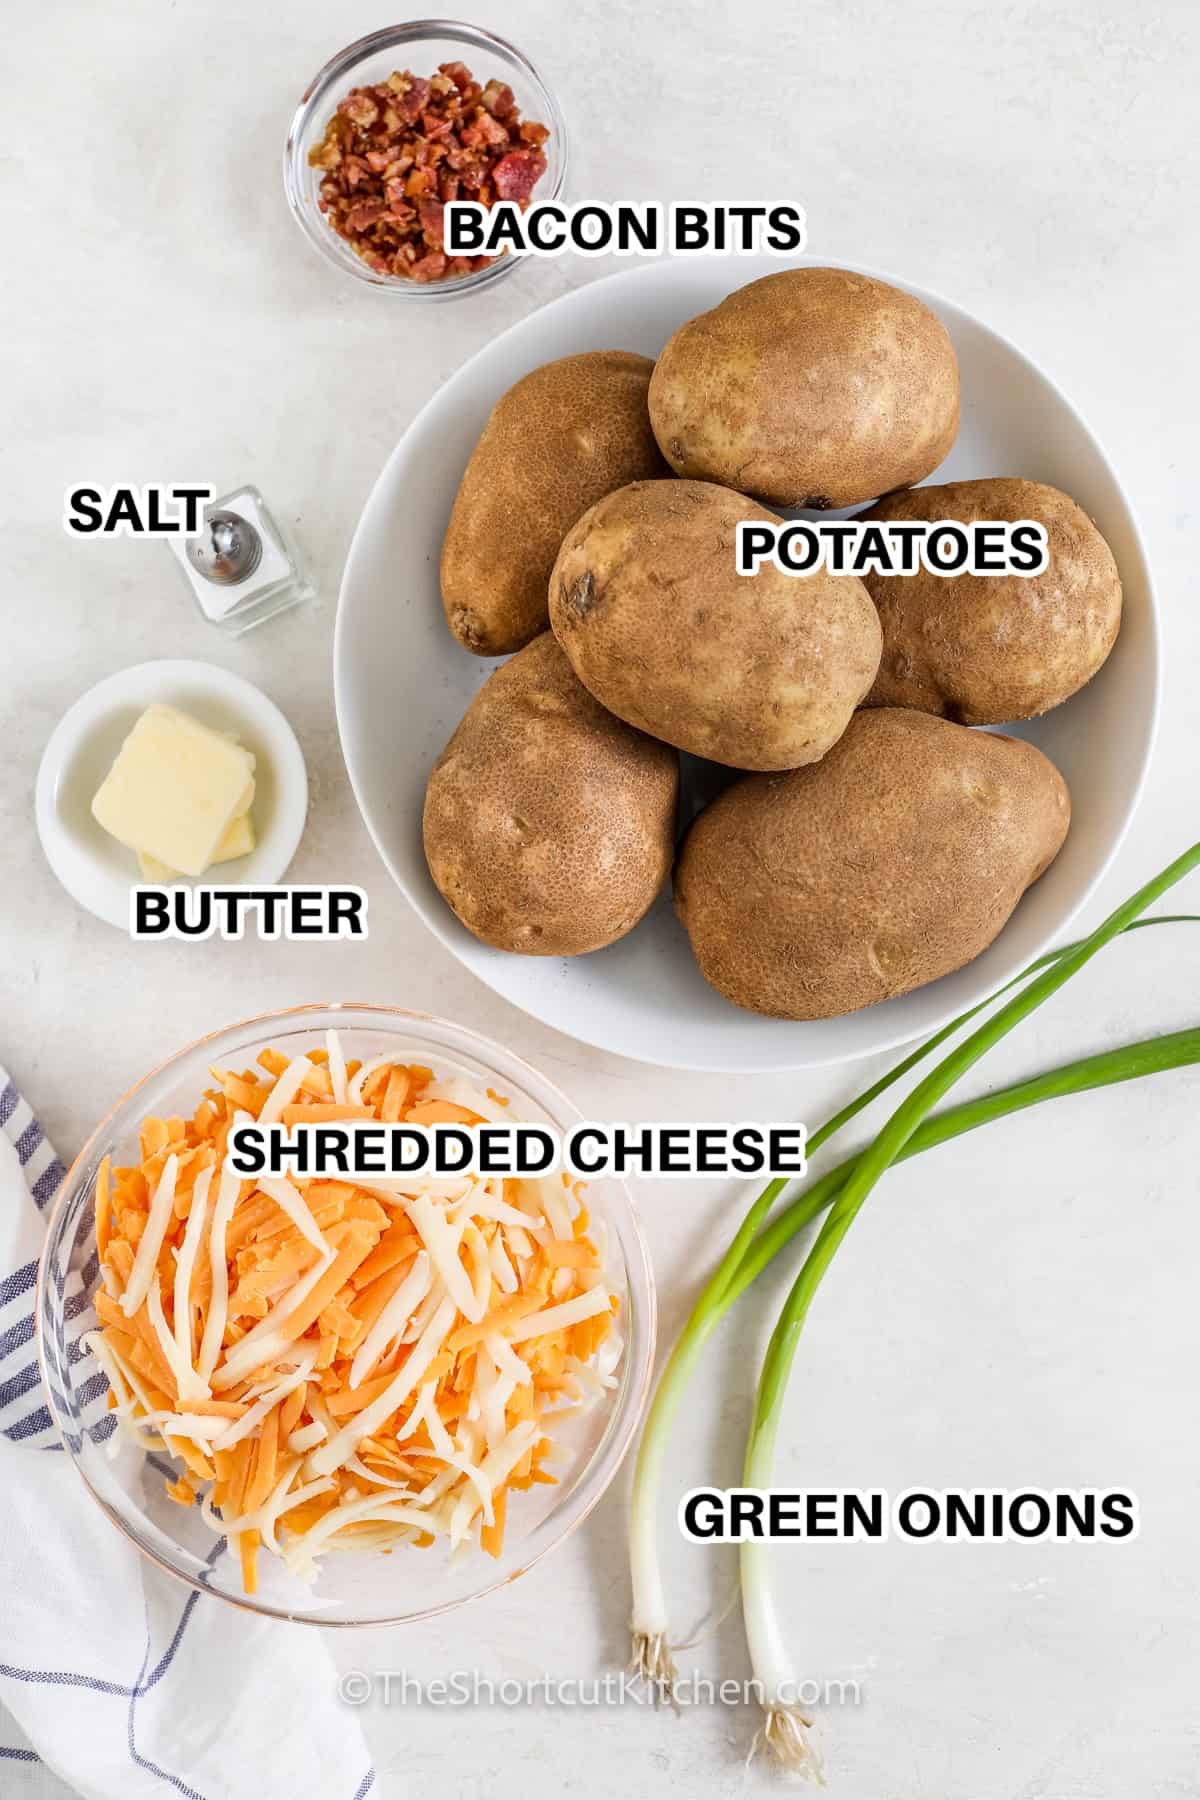 ingredients to make loaded potato skins labeled: bacon bits, potatoes, salt, butter, shredded cheese, and green onions.